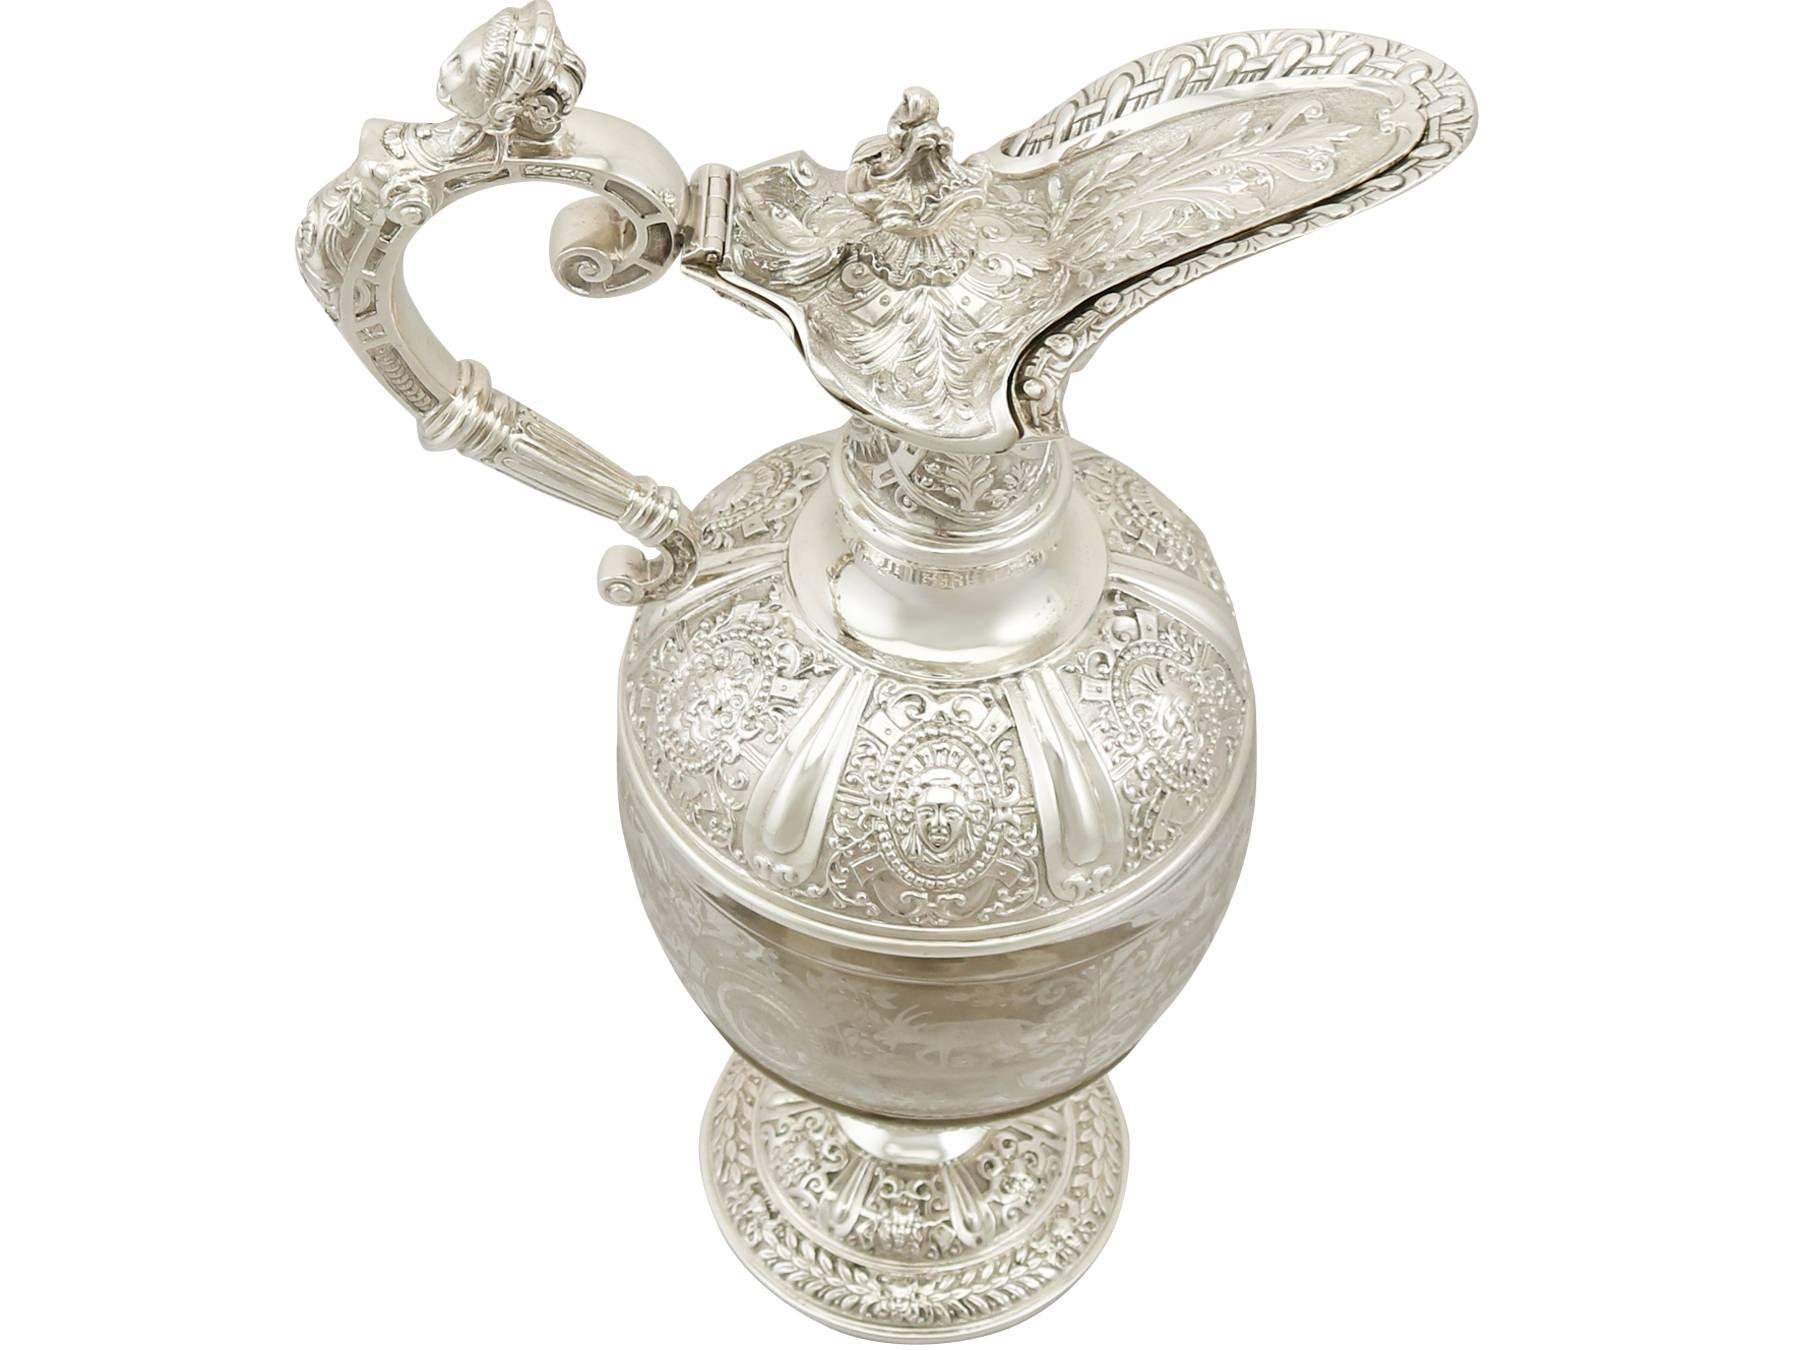 A magnificent, fine and impressive antique Victorian sterling silver and glass claret jug; an addition to our silver jug collection.

This magnificent antique Victorian English sterling silver and glass Cellini style claret jug has a ewer shaped